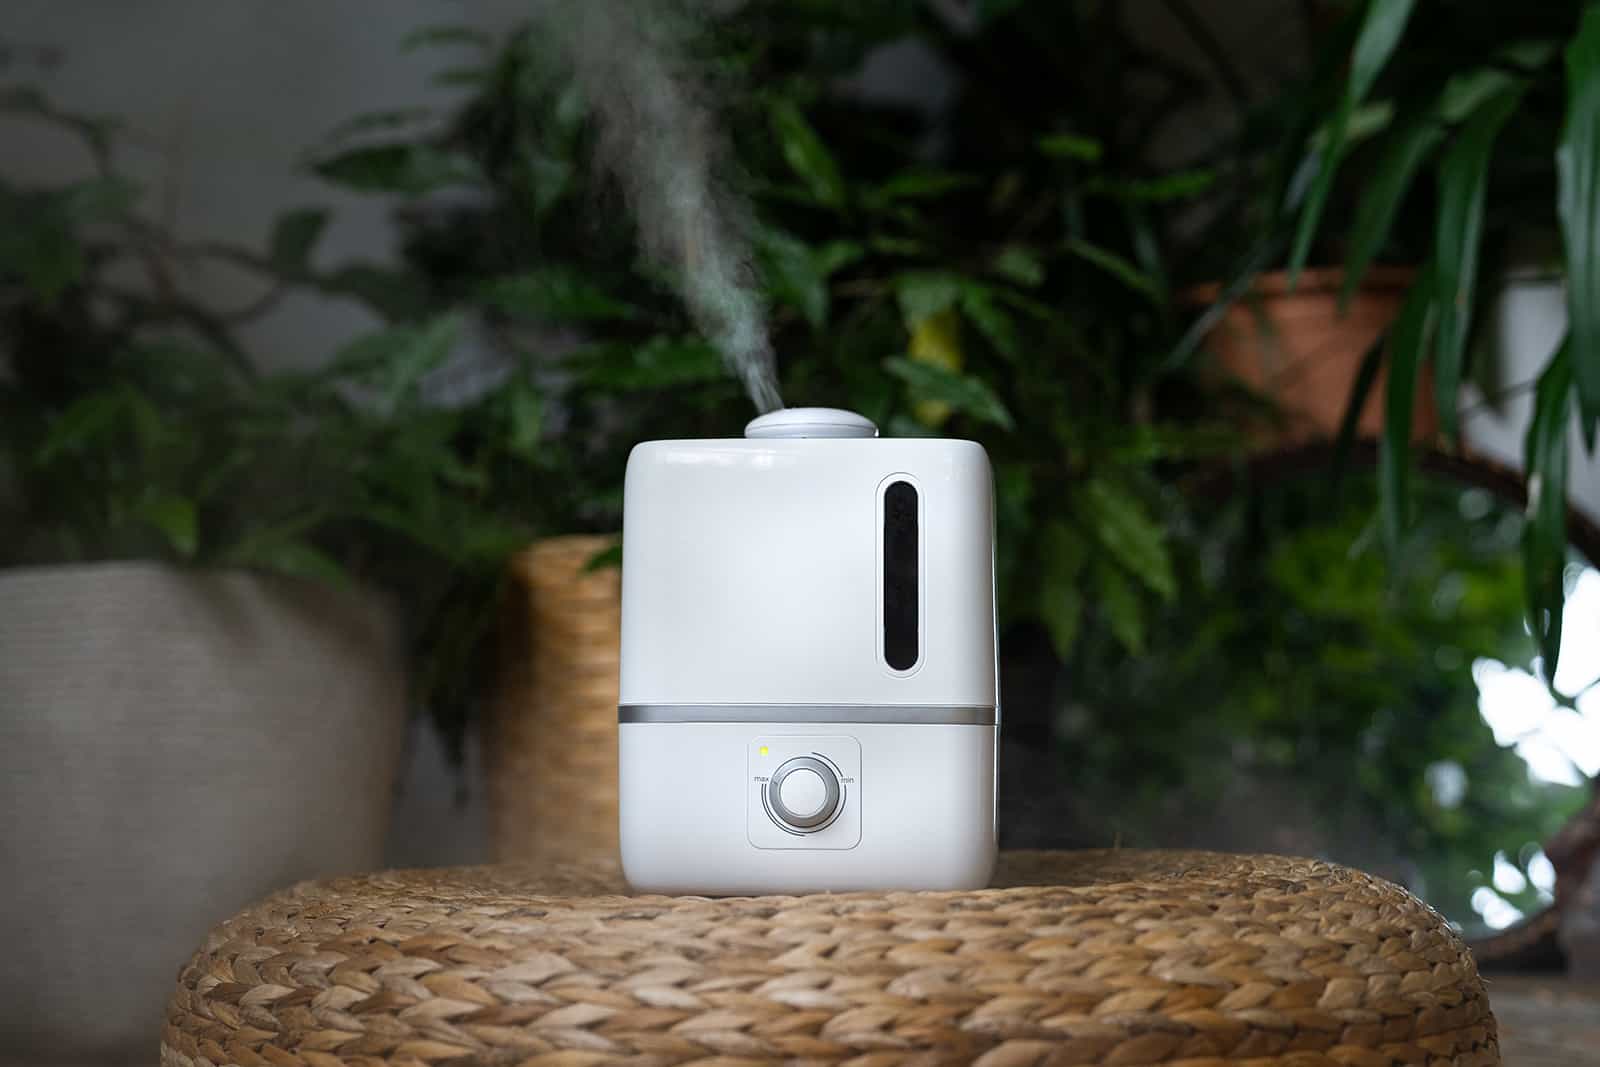 air humidifier in home garden among plants